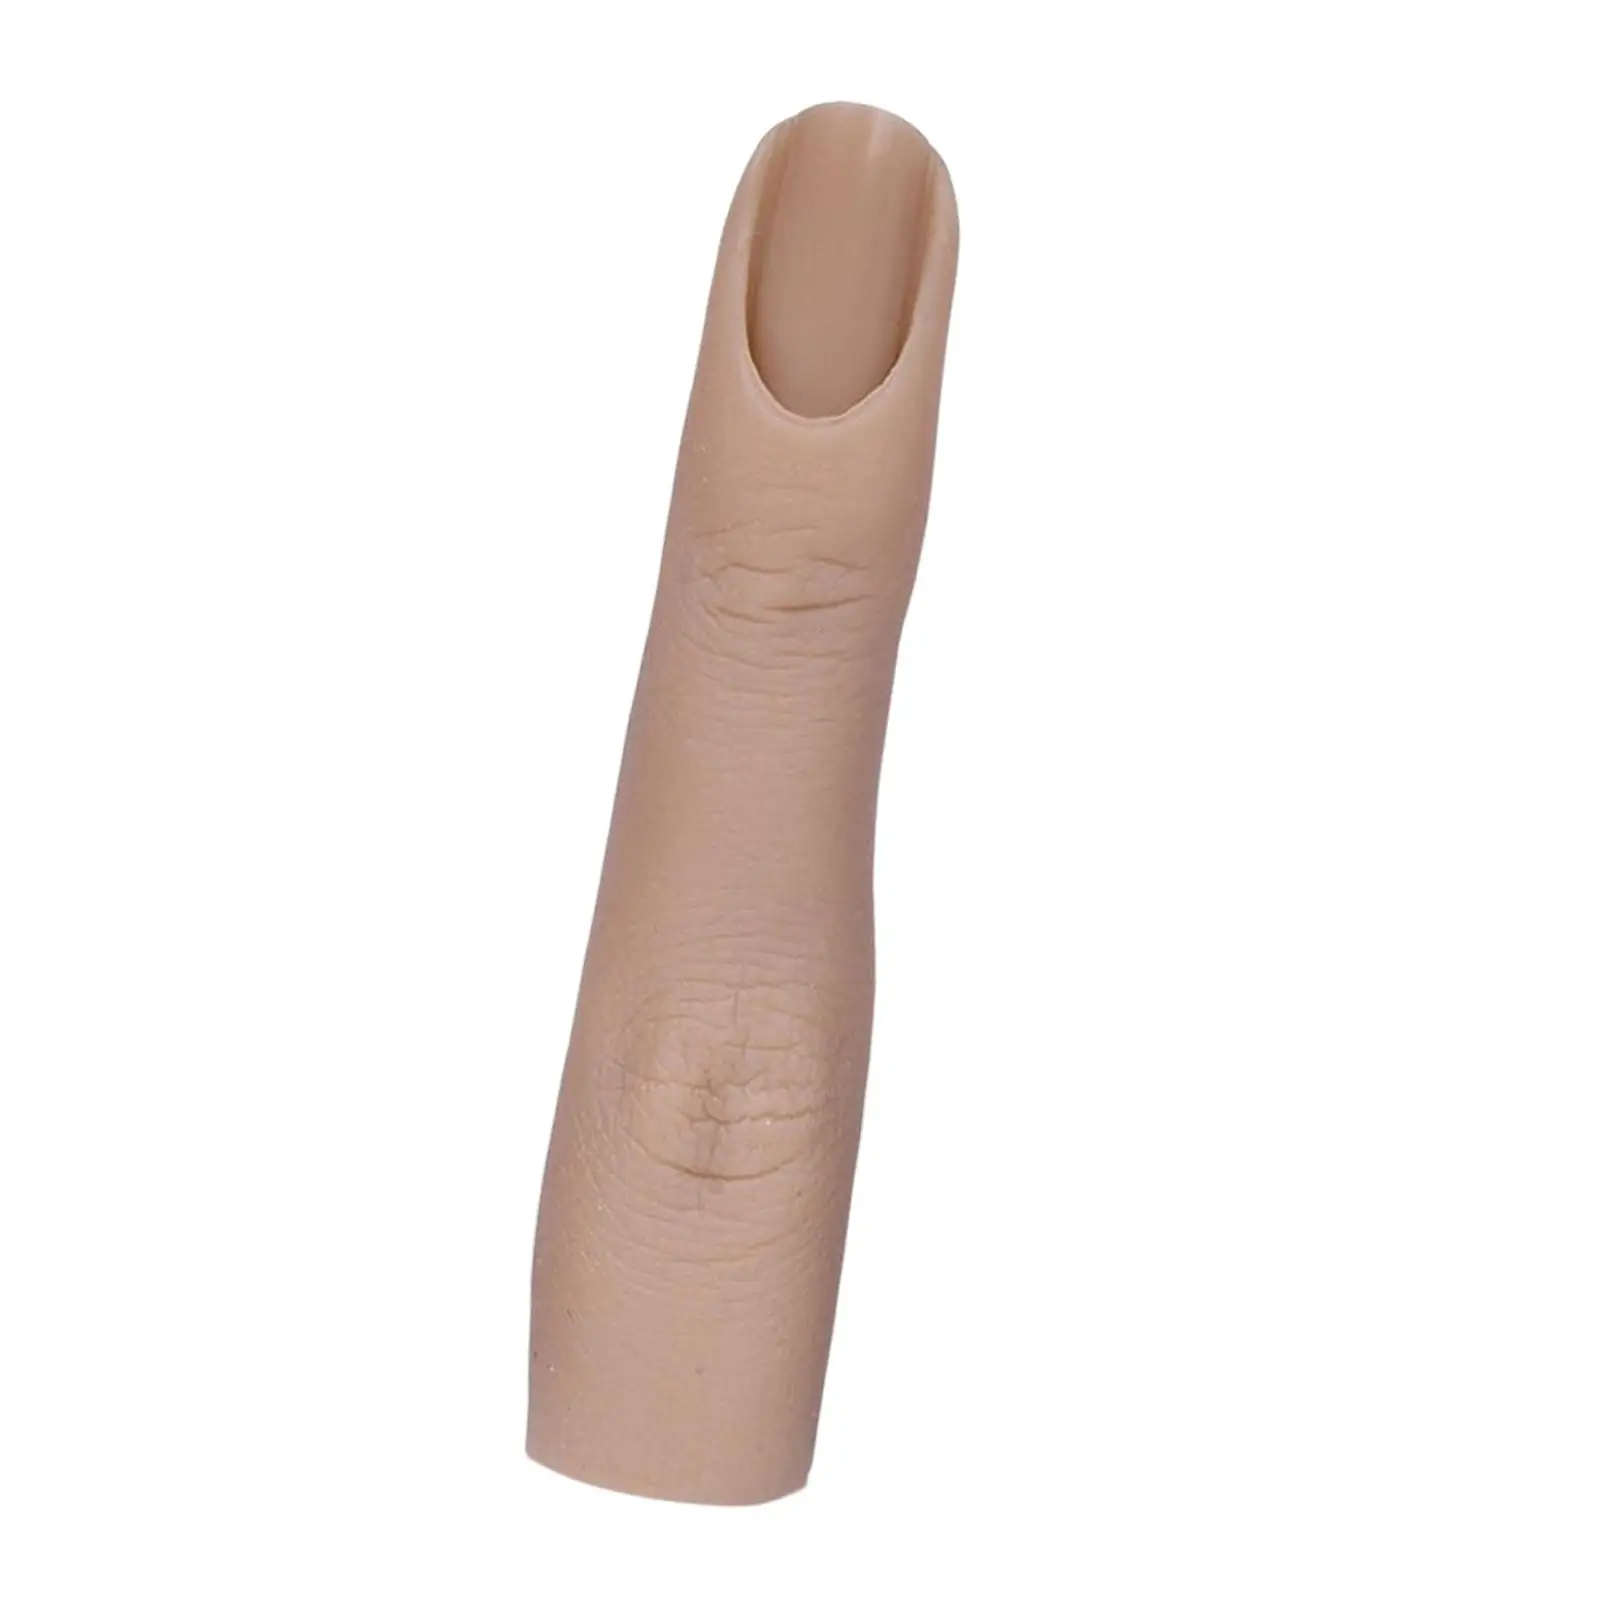 Silicone Nail Finger Model Tool Fake Finger Training Accesories Professional Finger Model DIY Bendable for Training Practicing